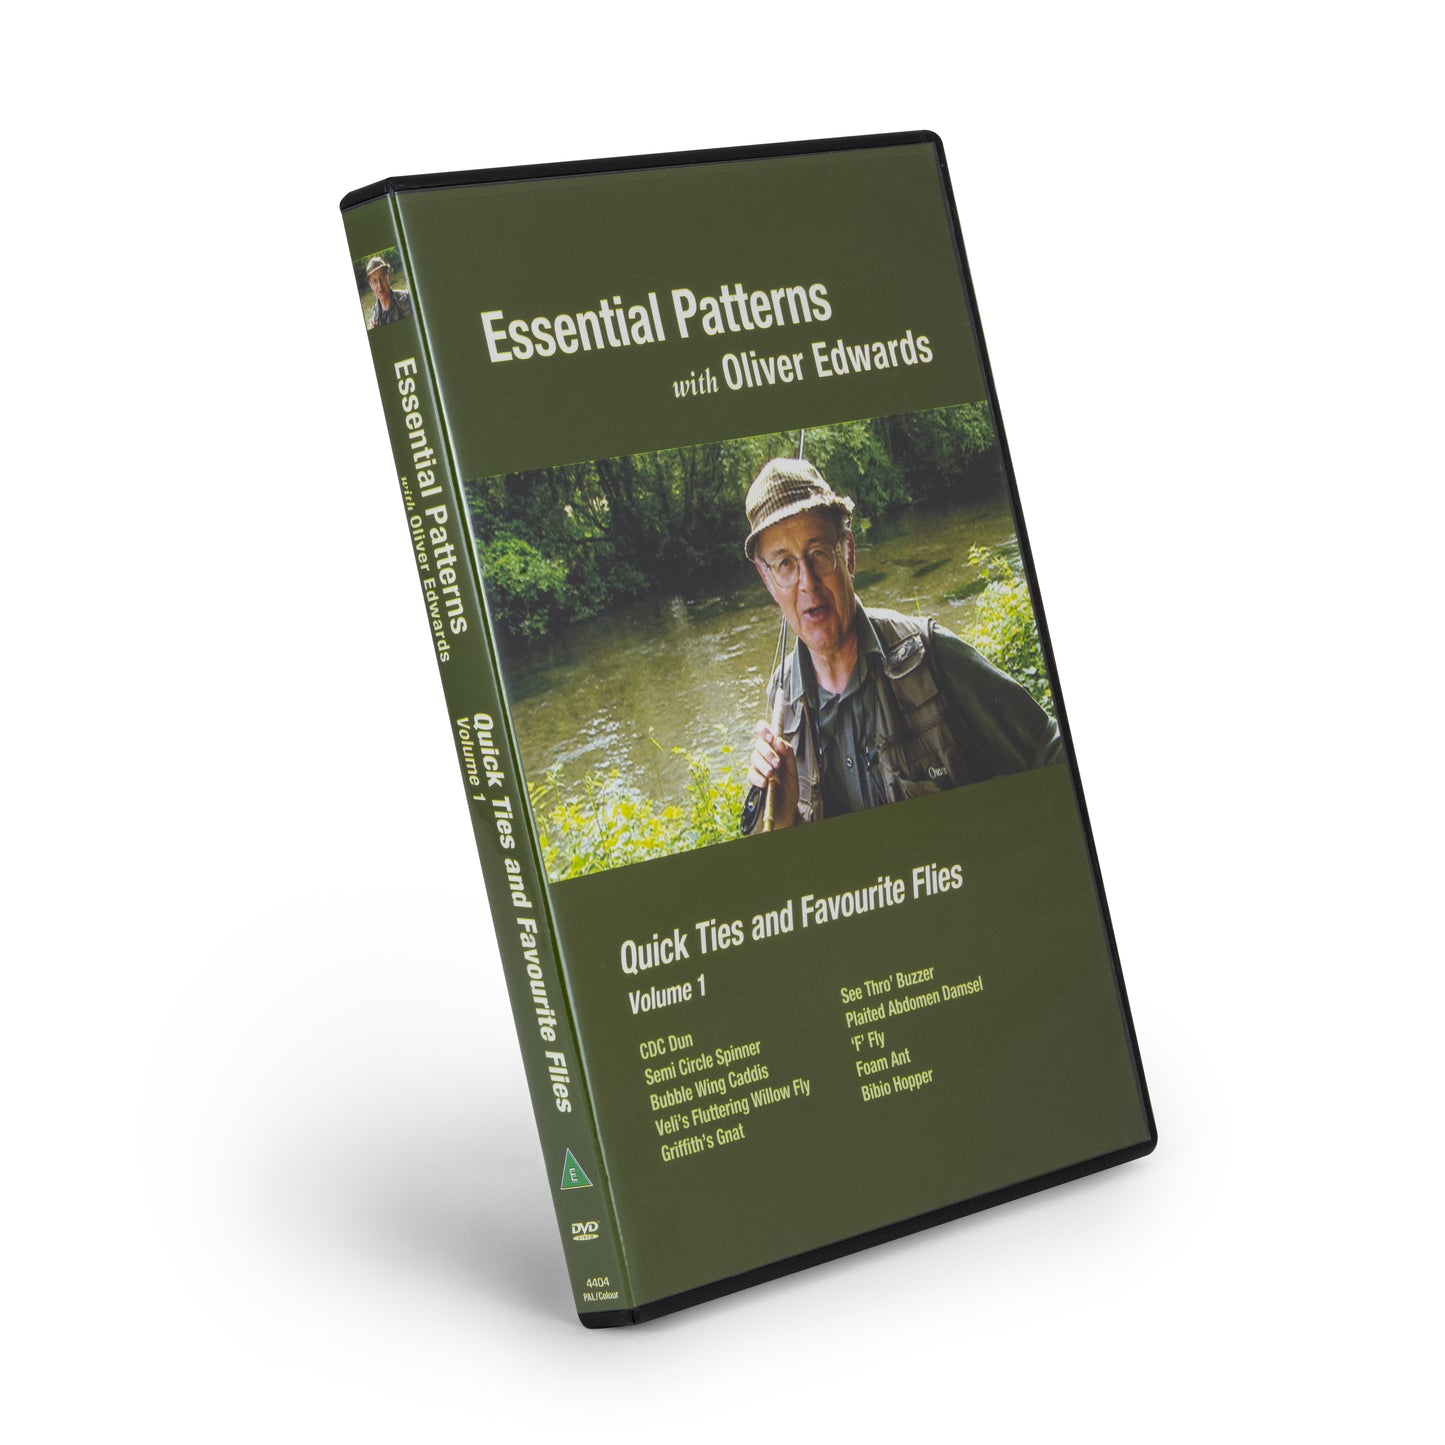 Essential Patterns Volume 1 – Quick Ties and Favourite Flies - Run Time 2 hours 50 mins